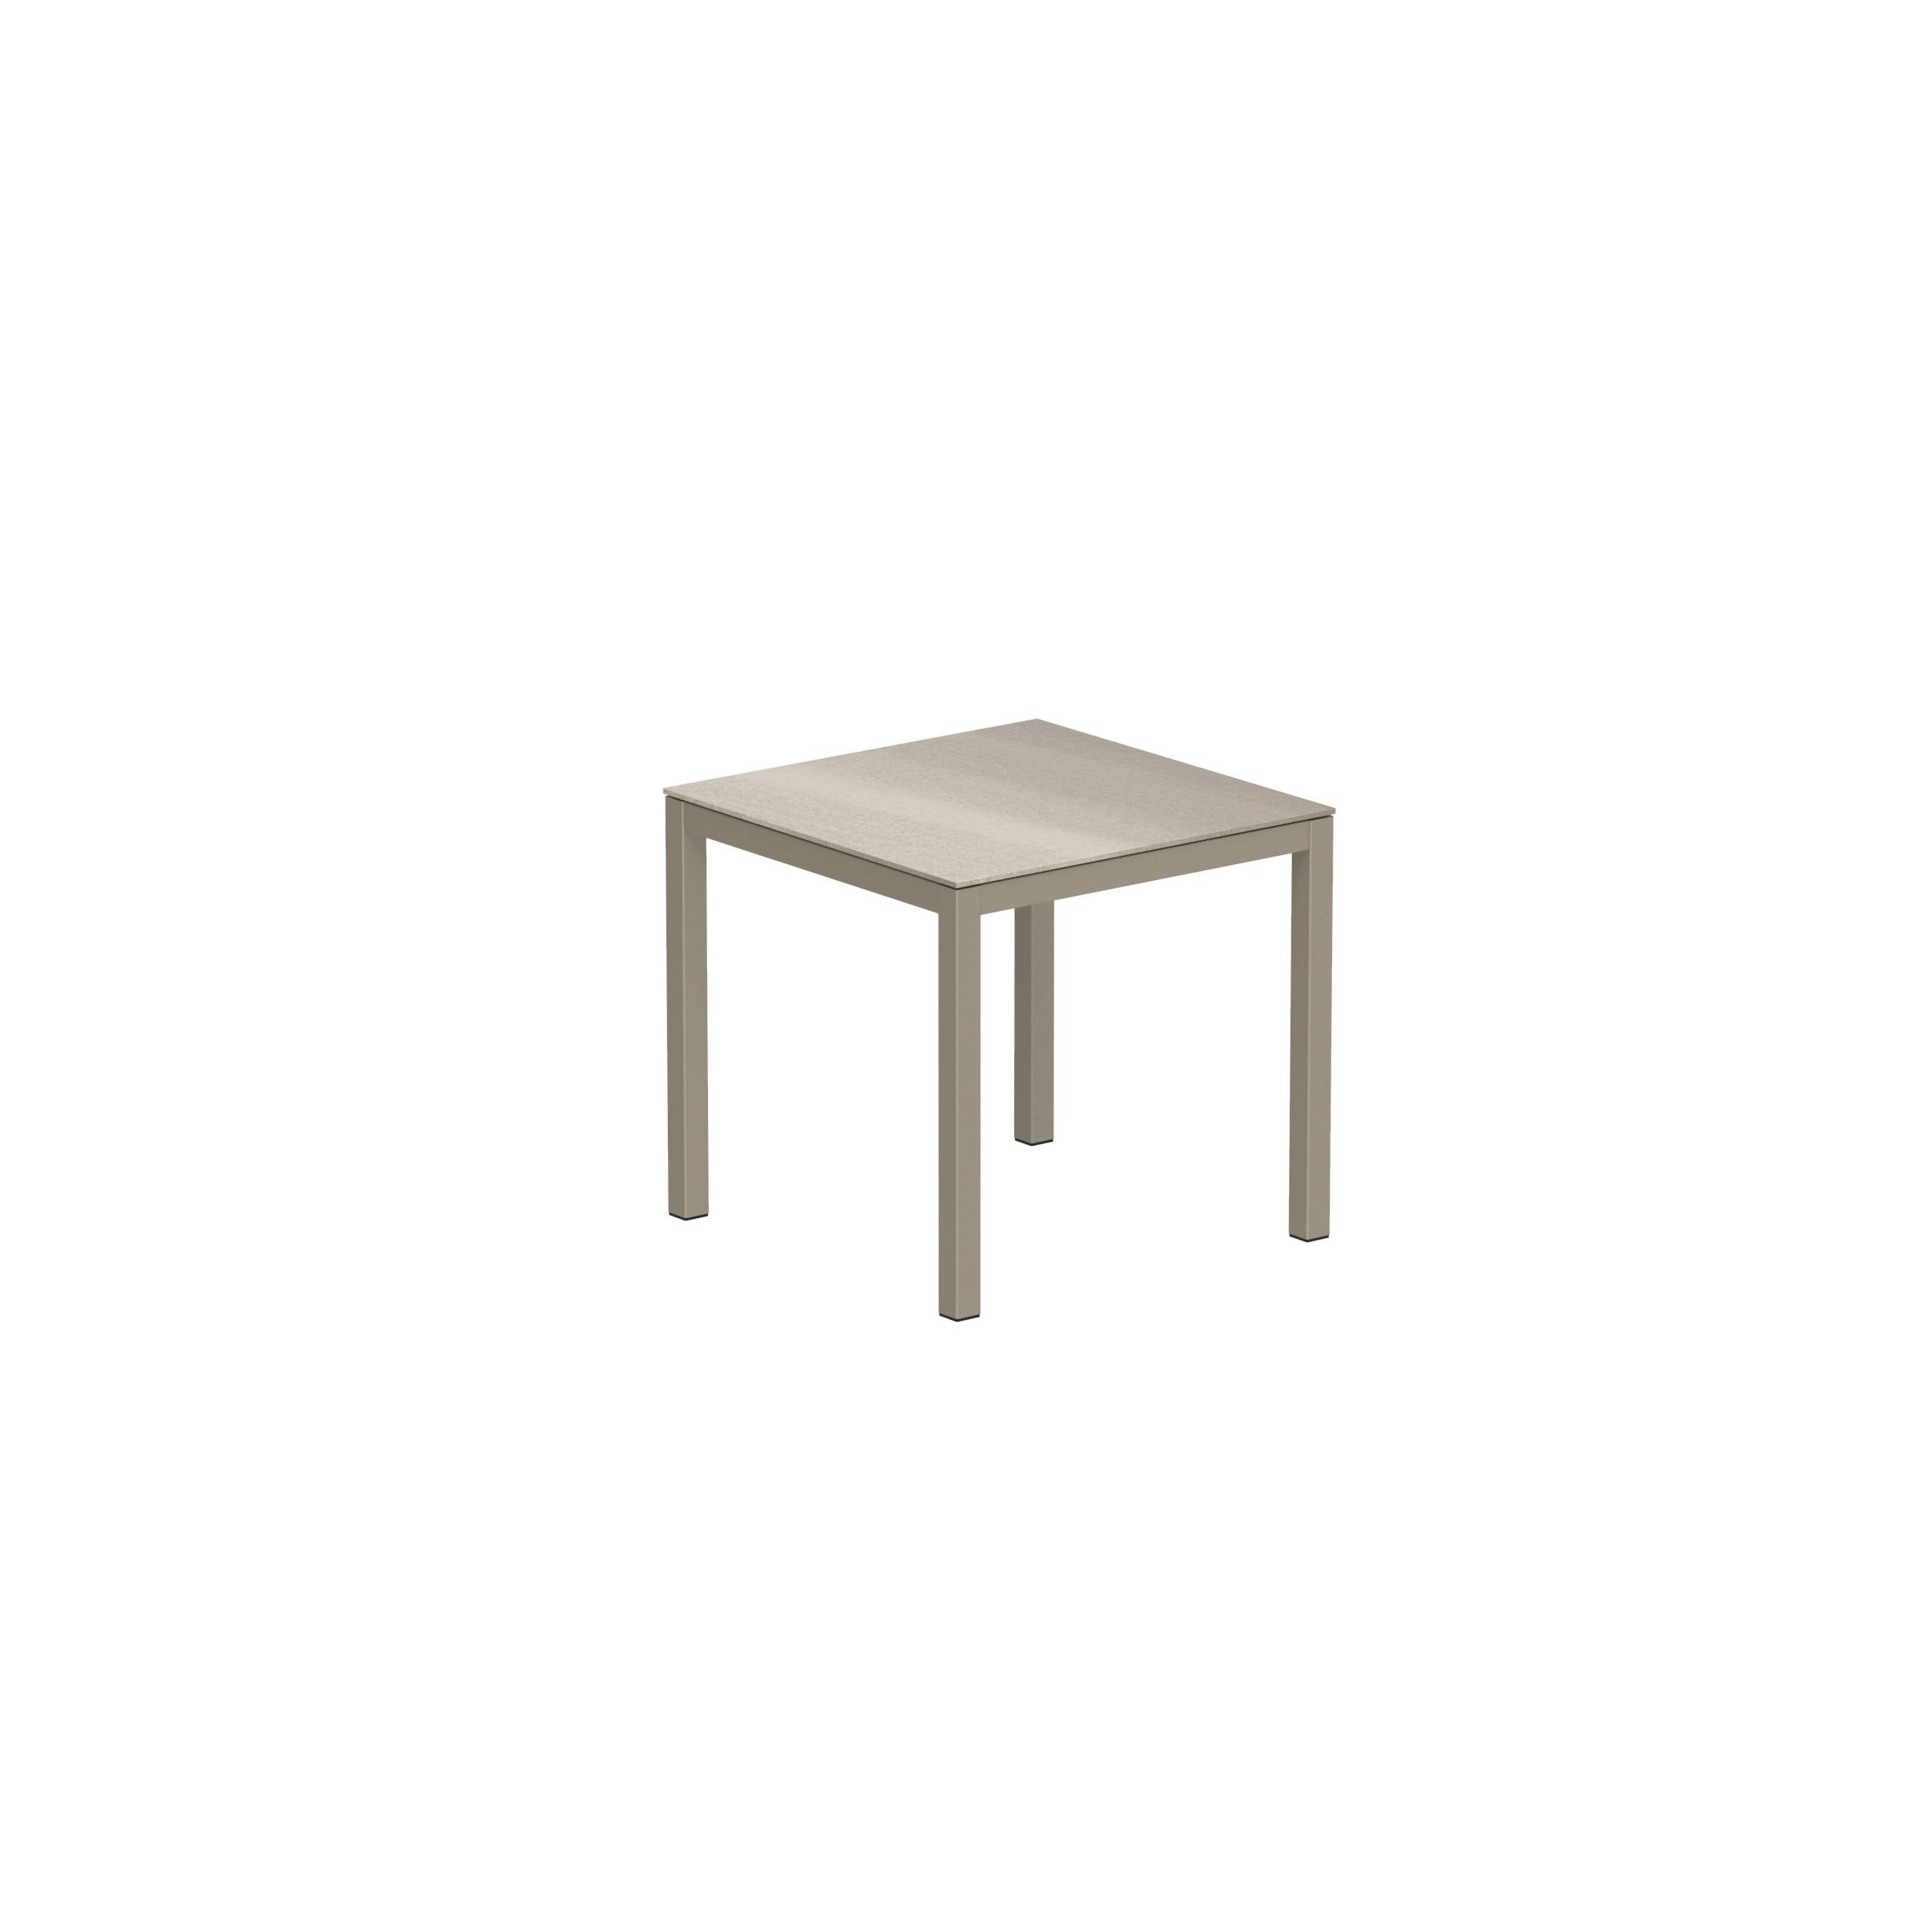 Taboela Table 80x80cm Sand With Ceramic Tabletop Taupe Grey